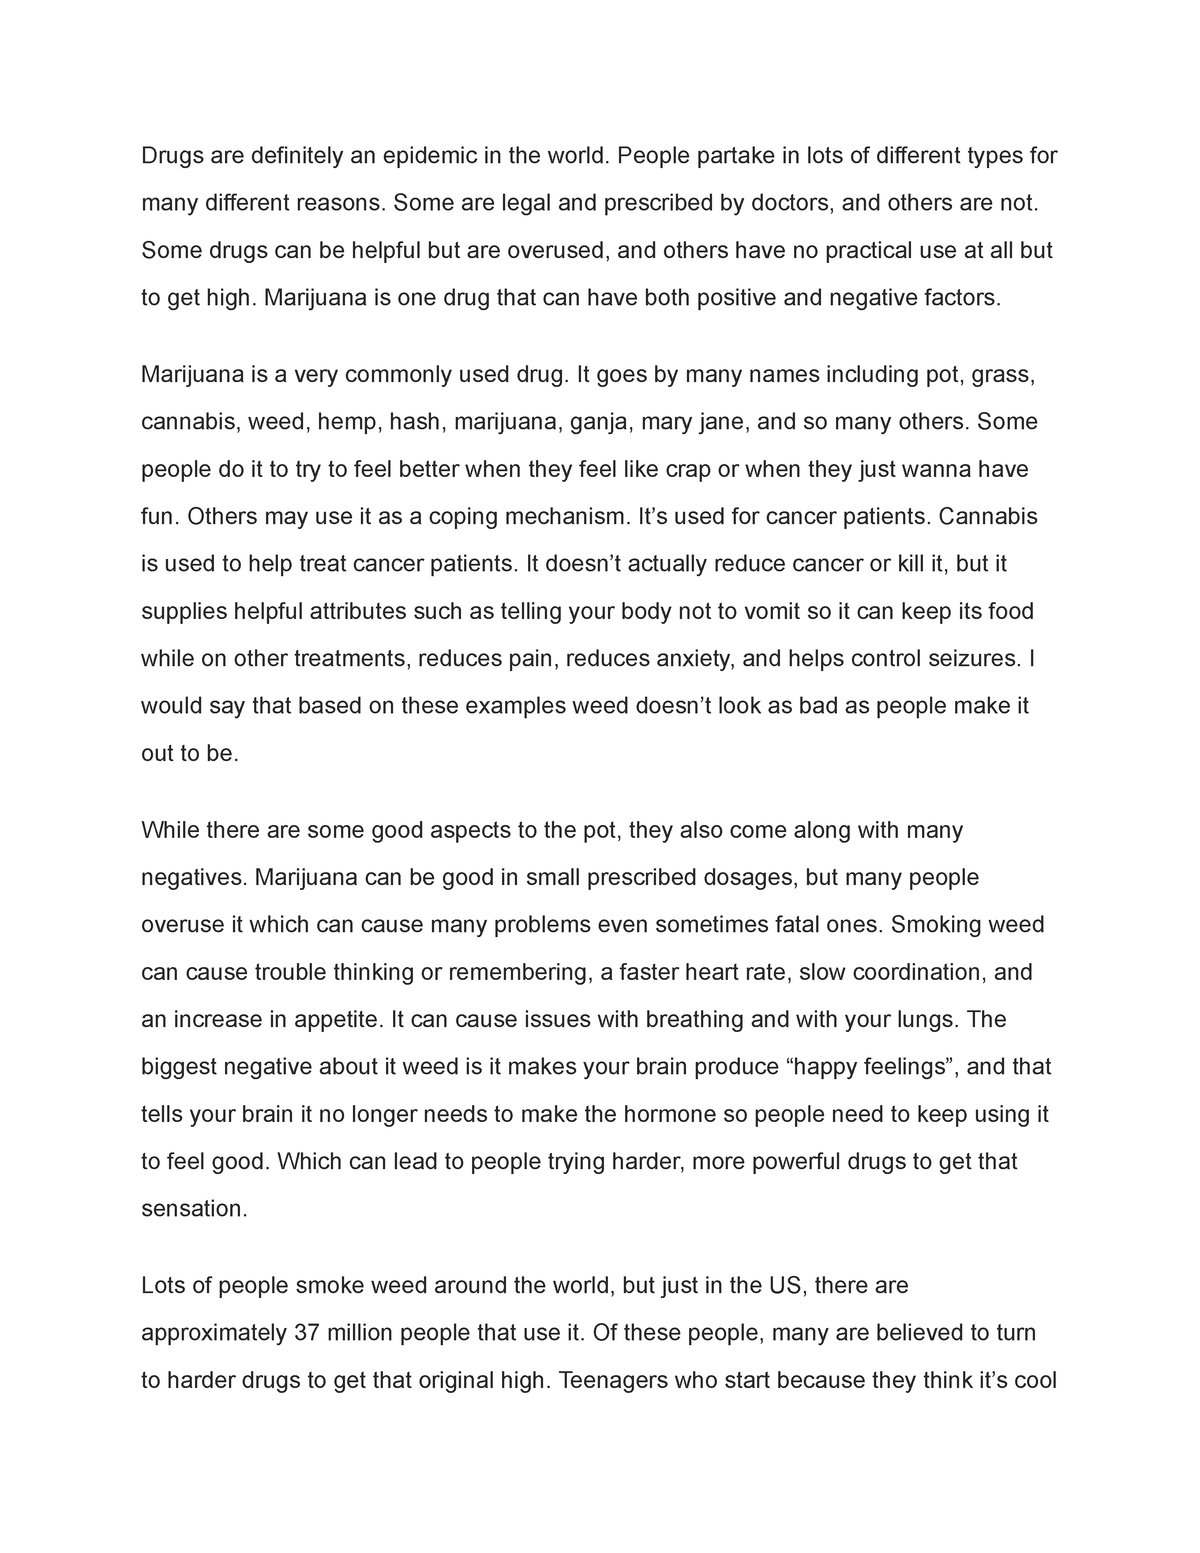 essay on why weed is bad